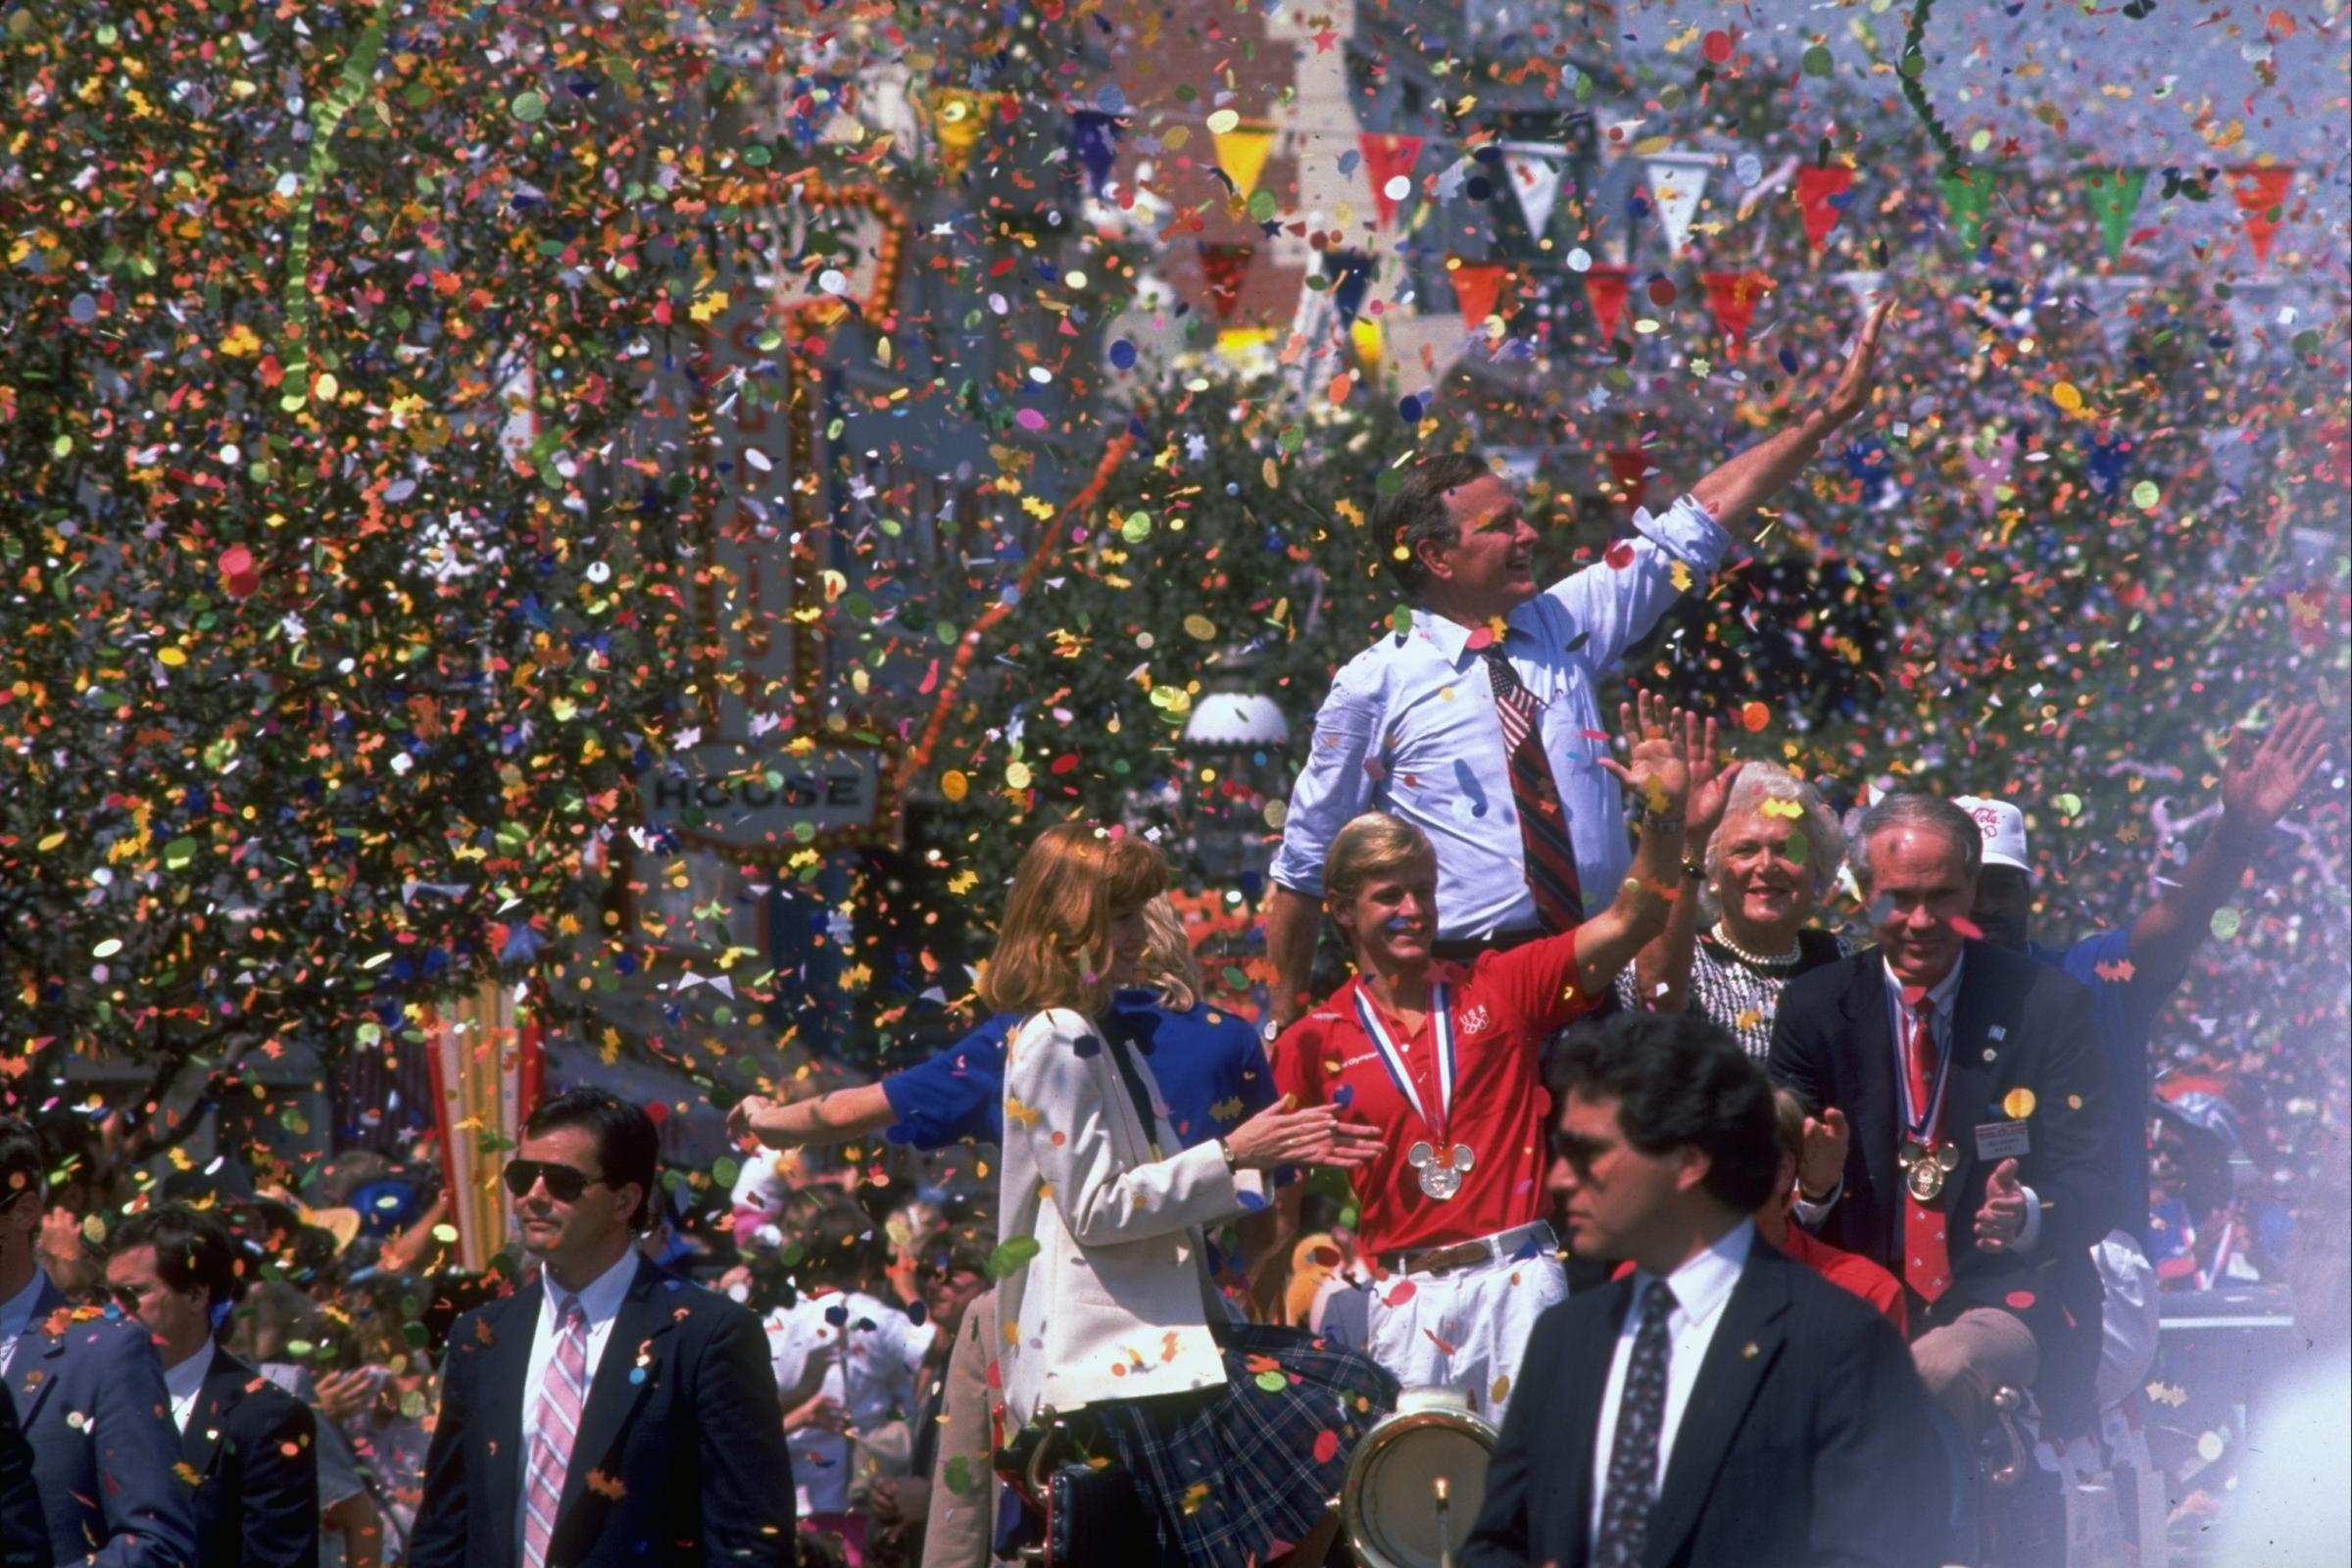 Republican presidential candidate George H.W. Bush waving above a crowd amid shower of parade confetti, with wife Barbara by his side at a send-off gala for the US Olympic team.